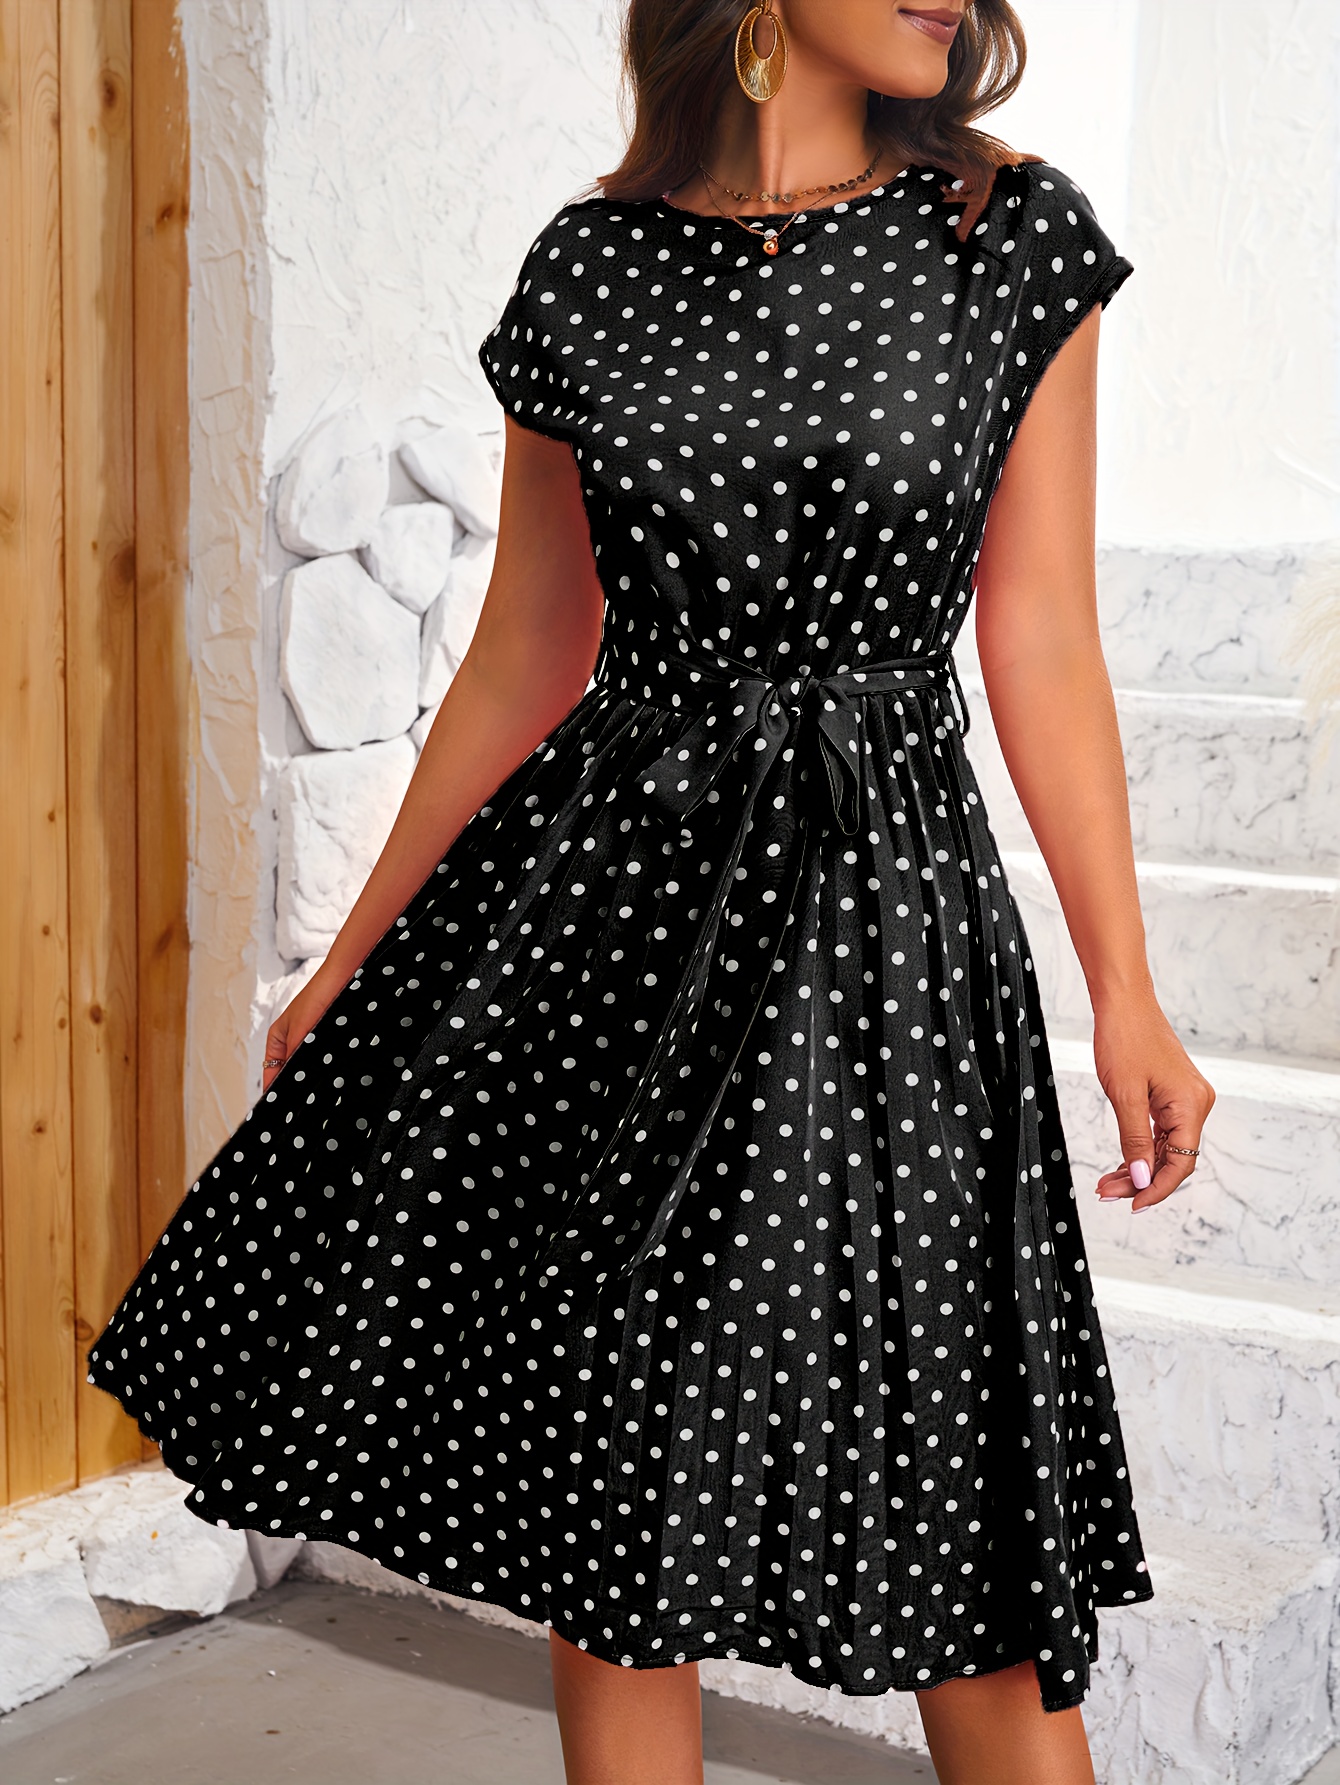 polka dot pleated dress short sleeve casual dress for spring summer womens clothing details 5